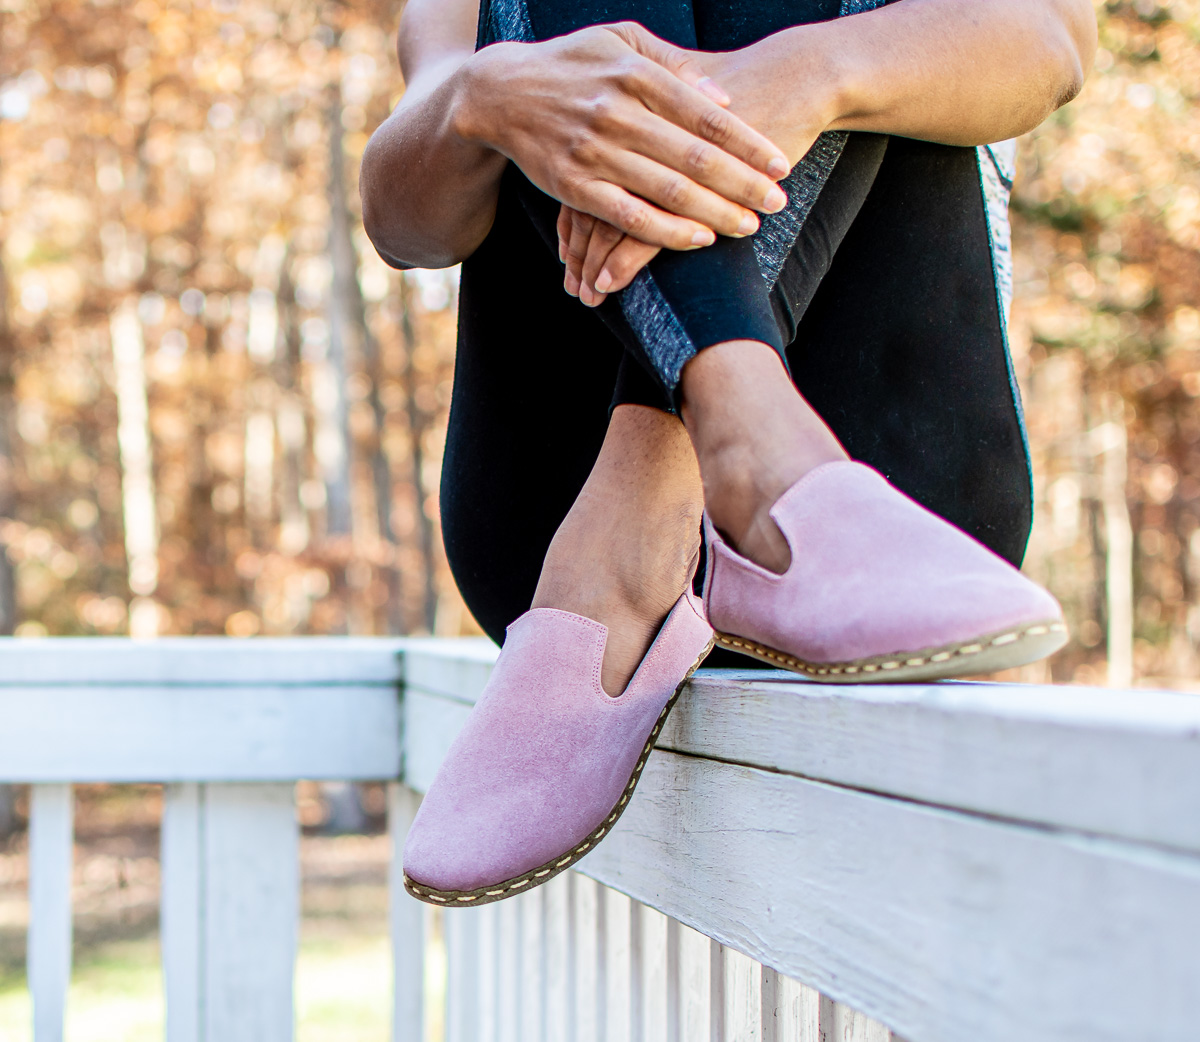 25 Best Family Footwear Brands This Holiday Season